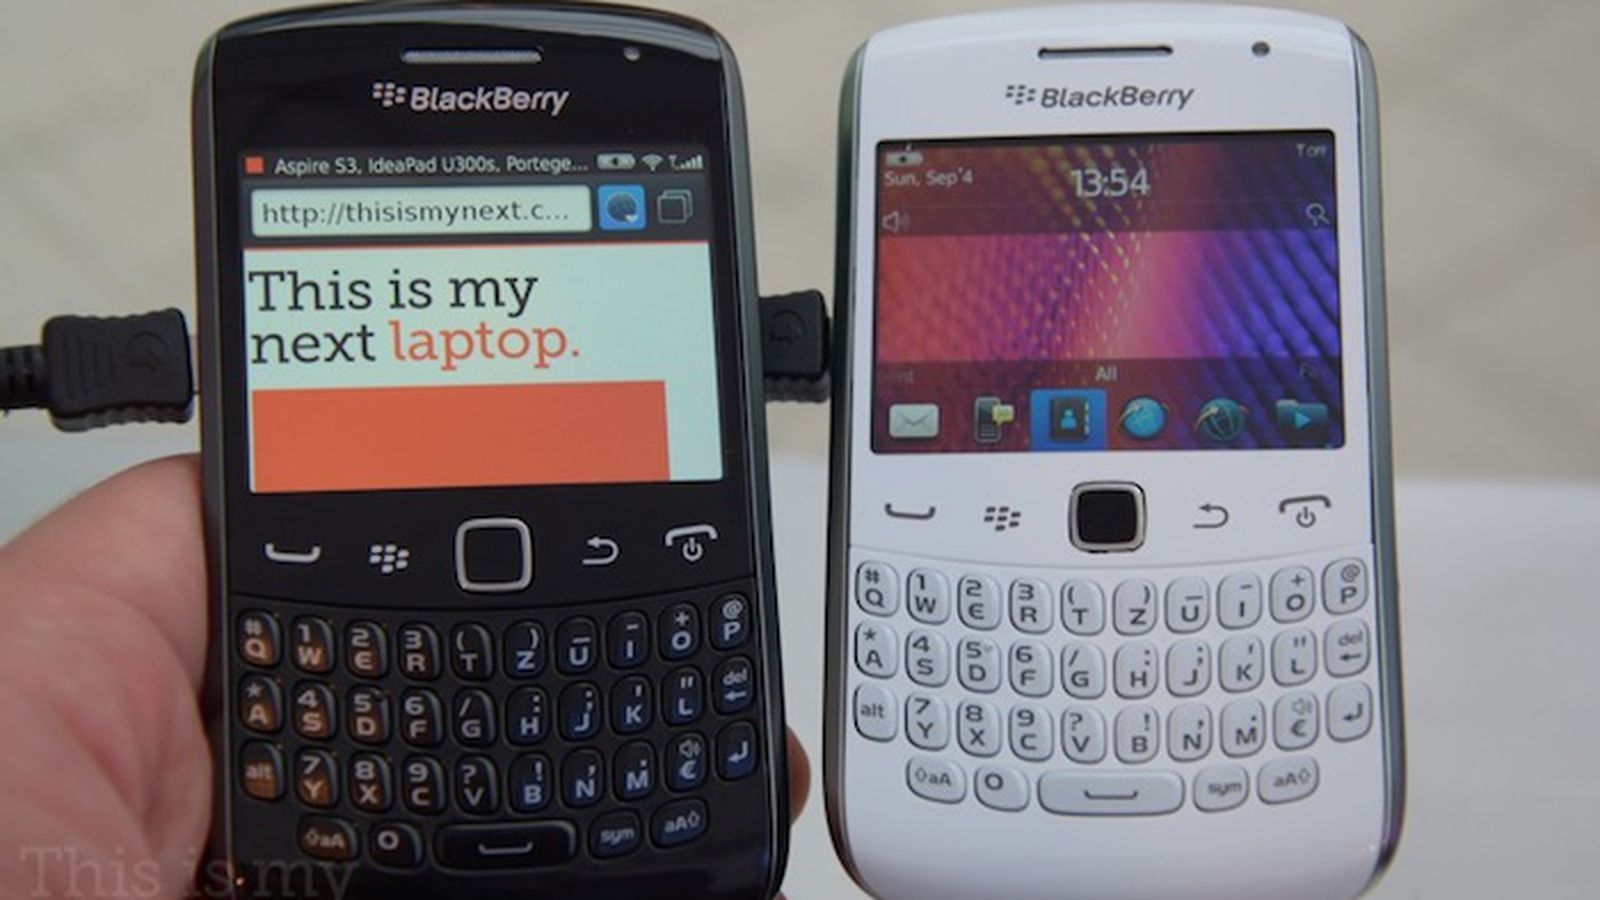 BlackBerry Tag lets users tap phones to exchange documents contacts  